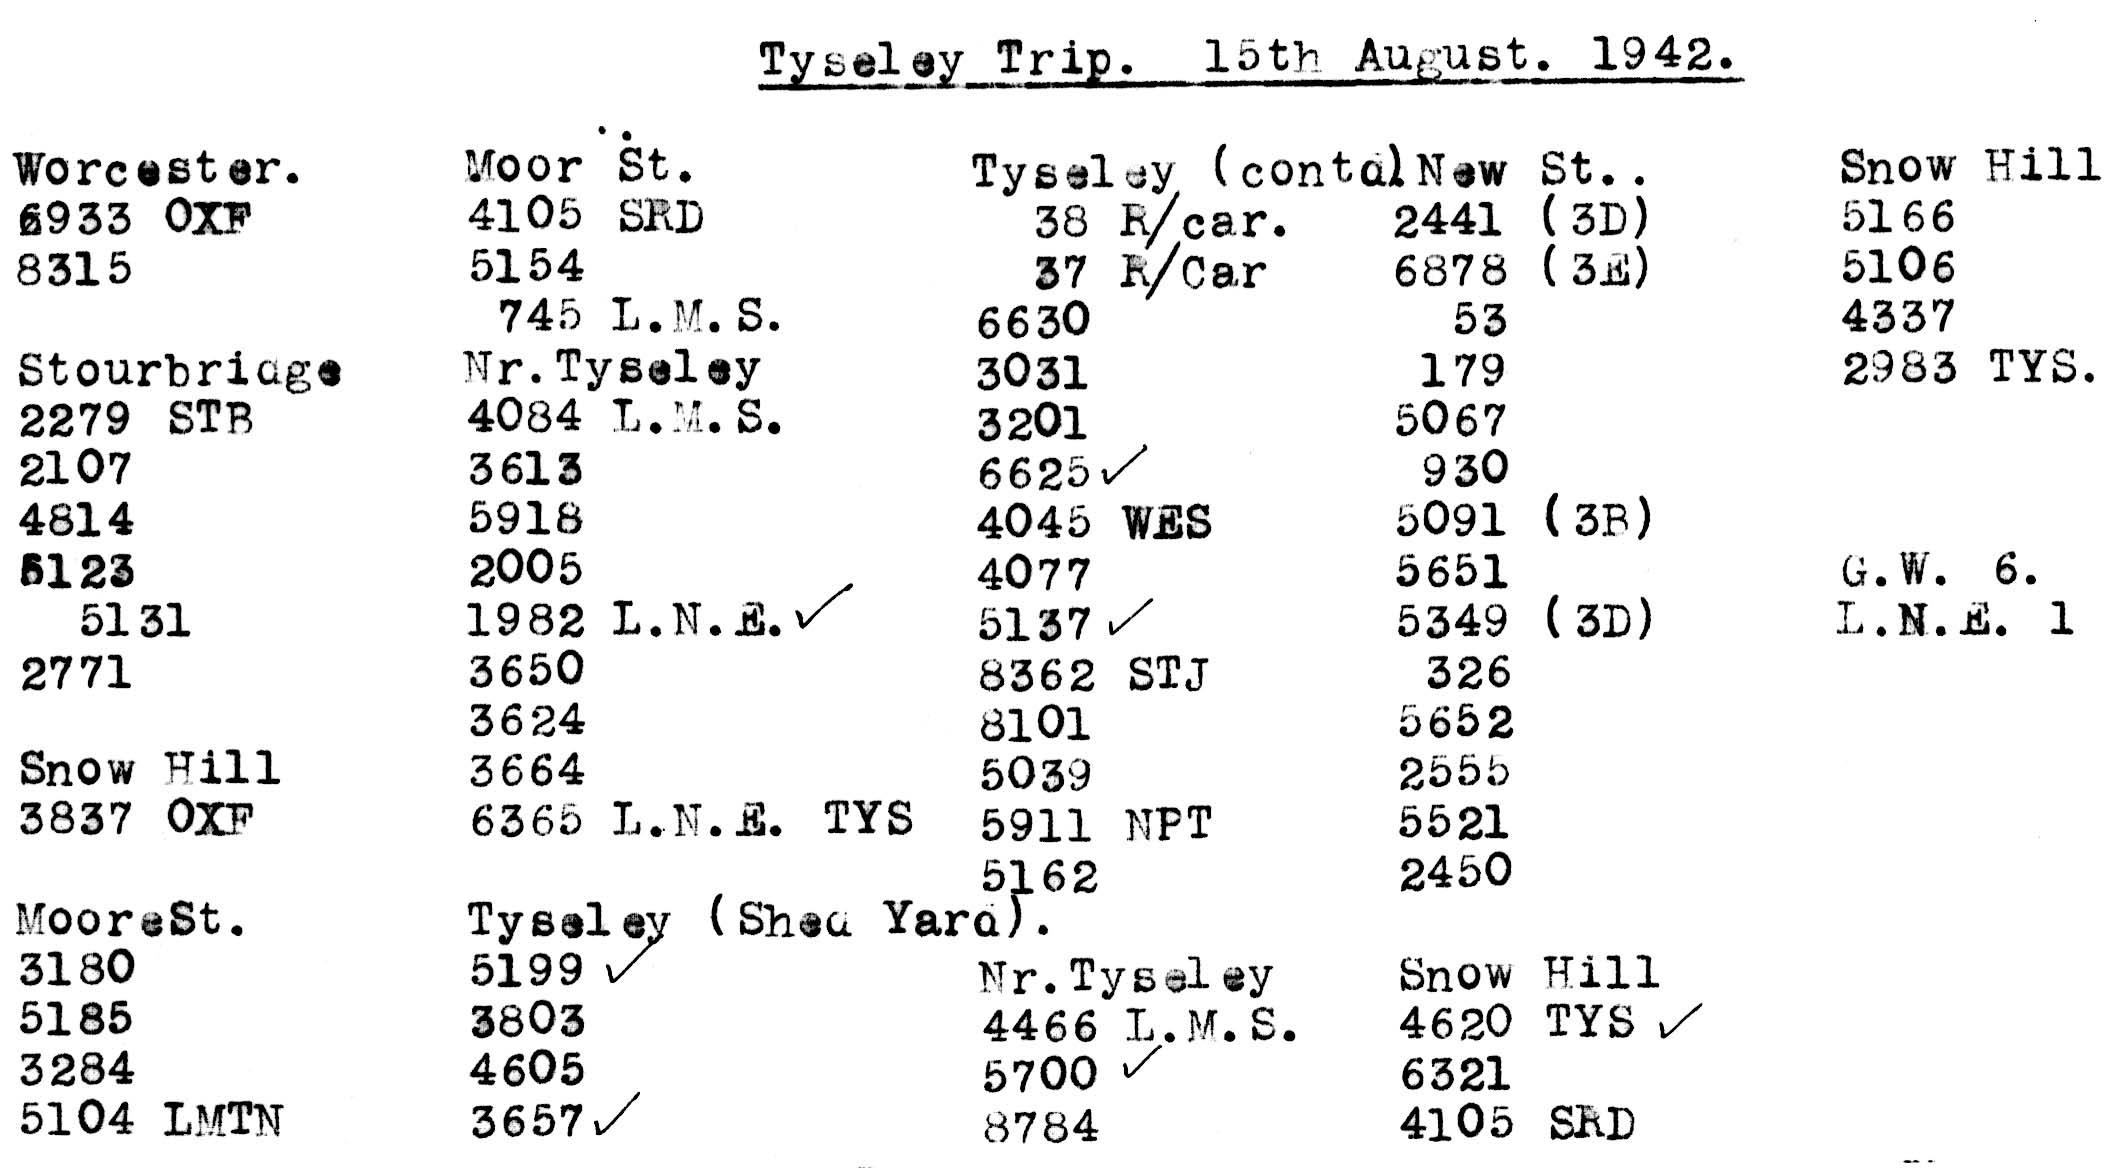 15th August 1942 - Trip to Tyseley.